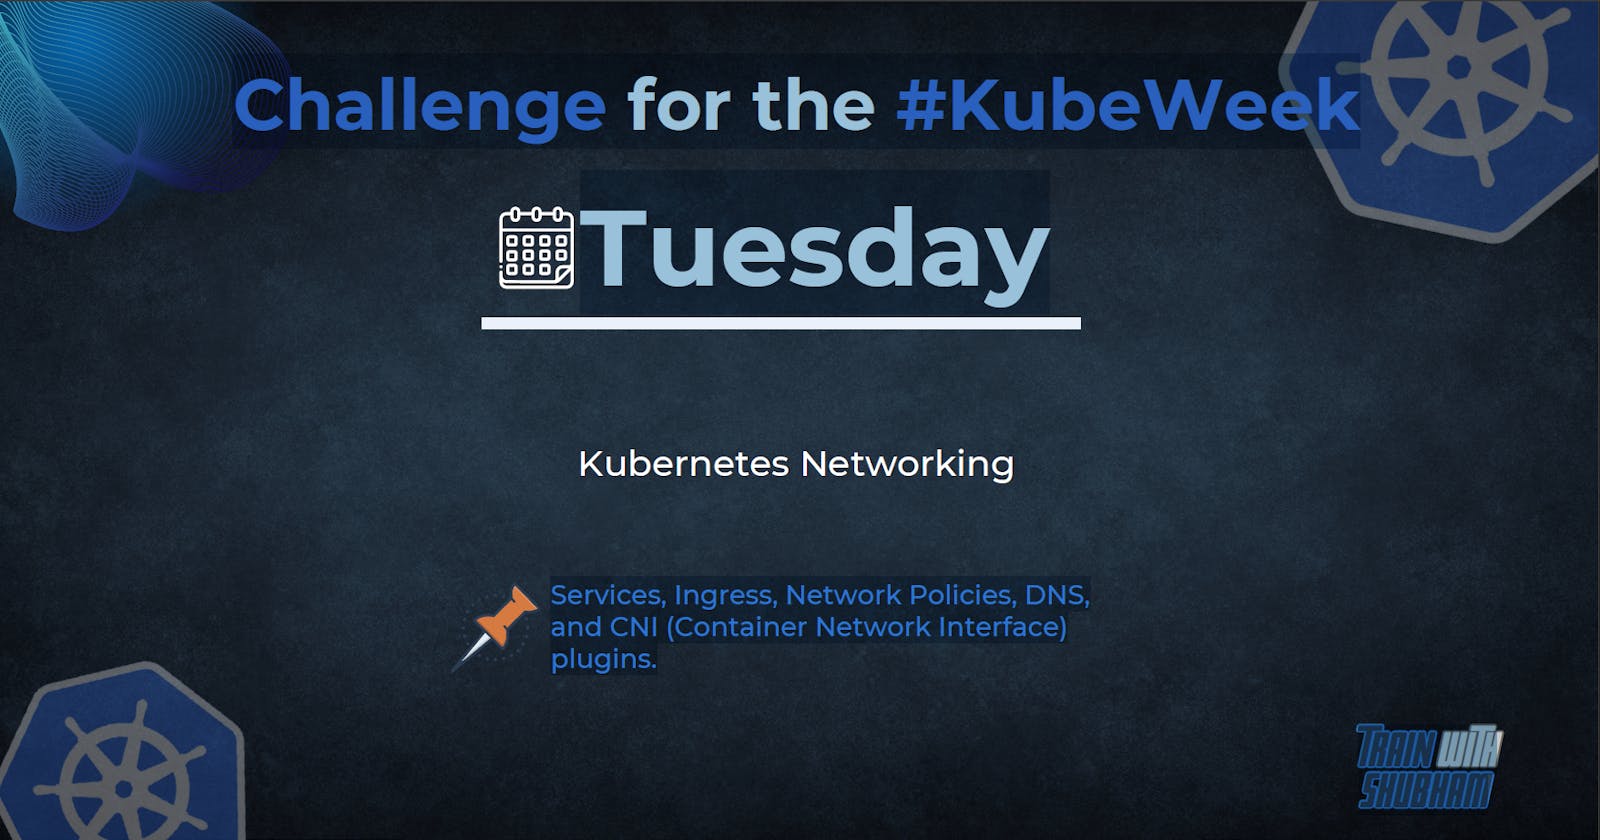 Day 2 - Kubernetes Networking: Ingress, Network Policies, DNS, CNI Plugins